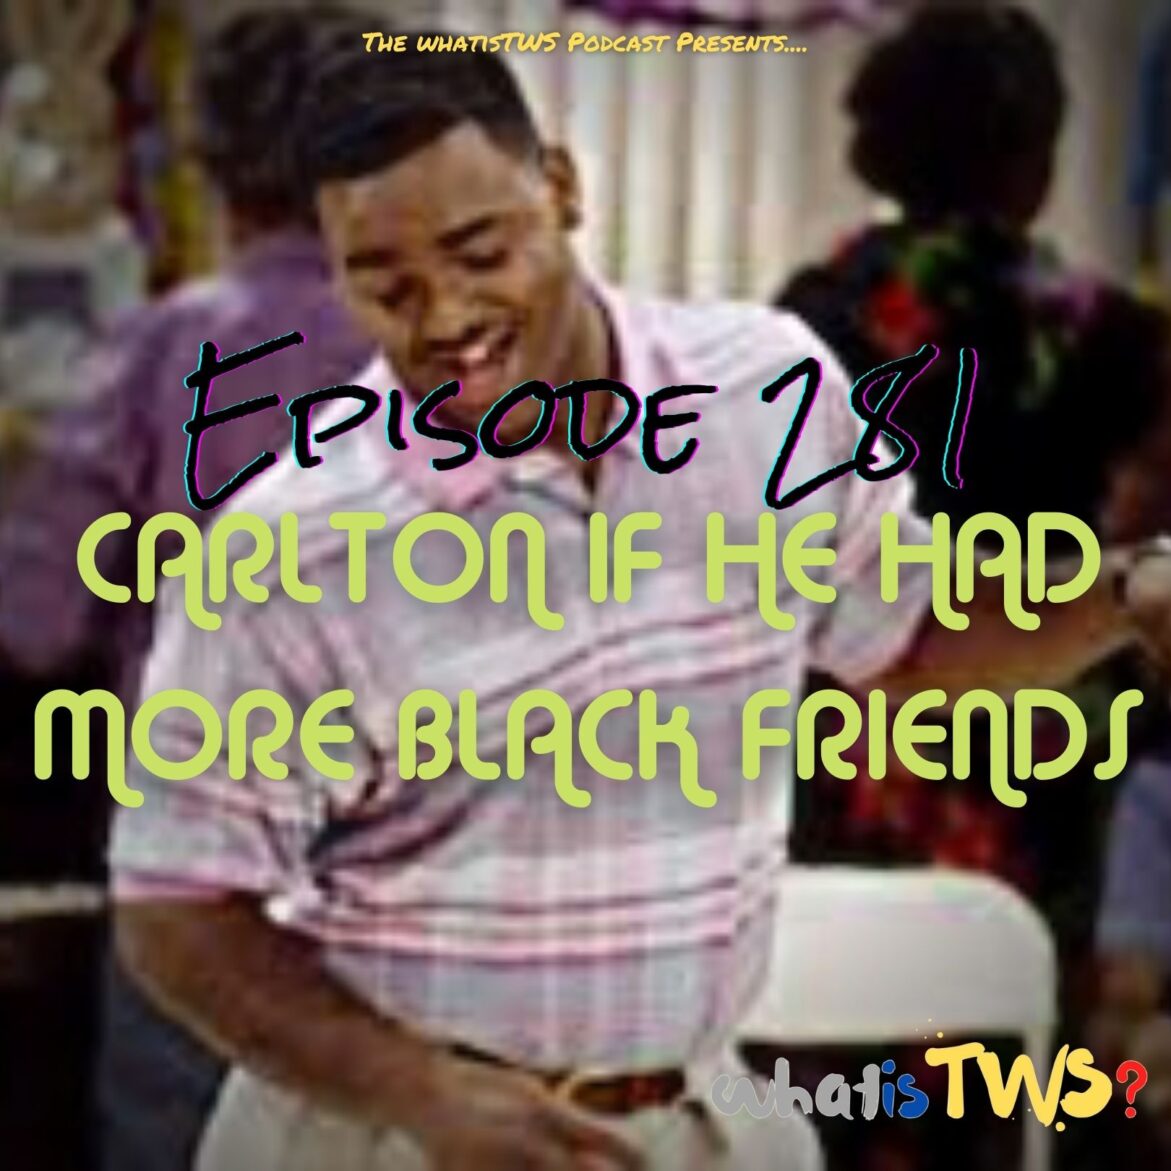 Black Podcasting - Episode 281 - Carlton, If He Had More Black Friends